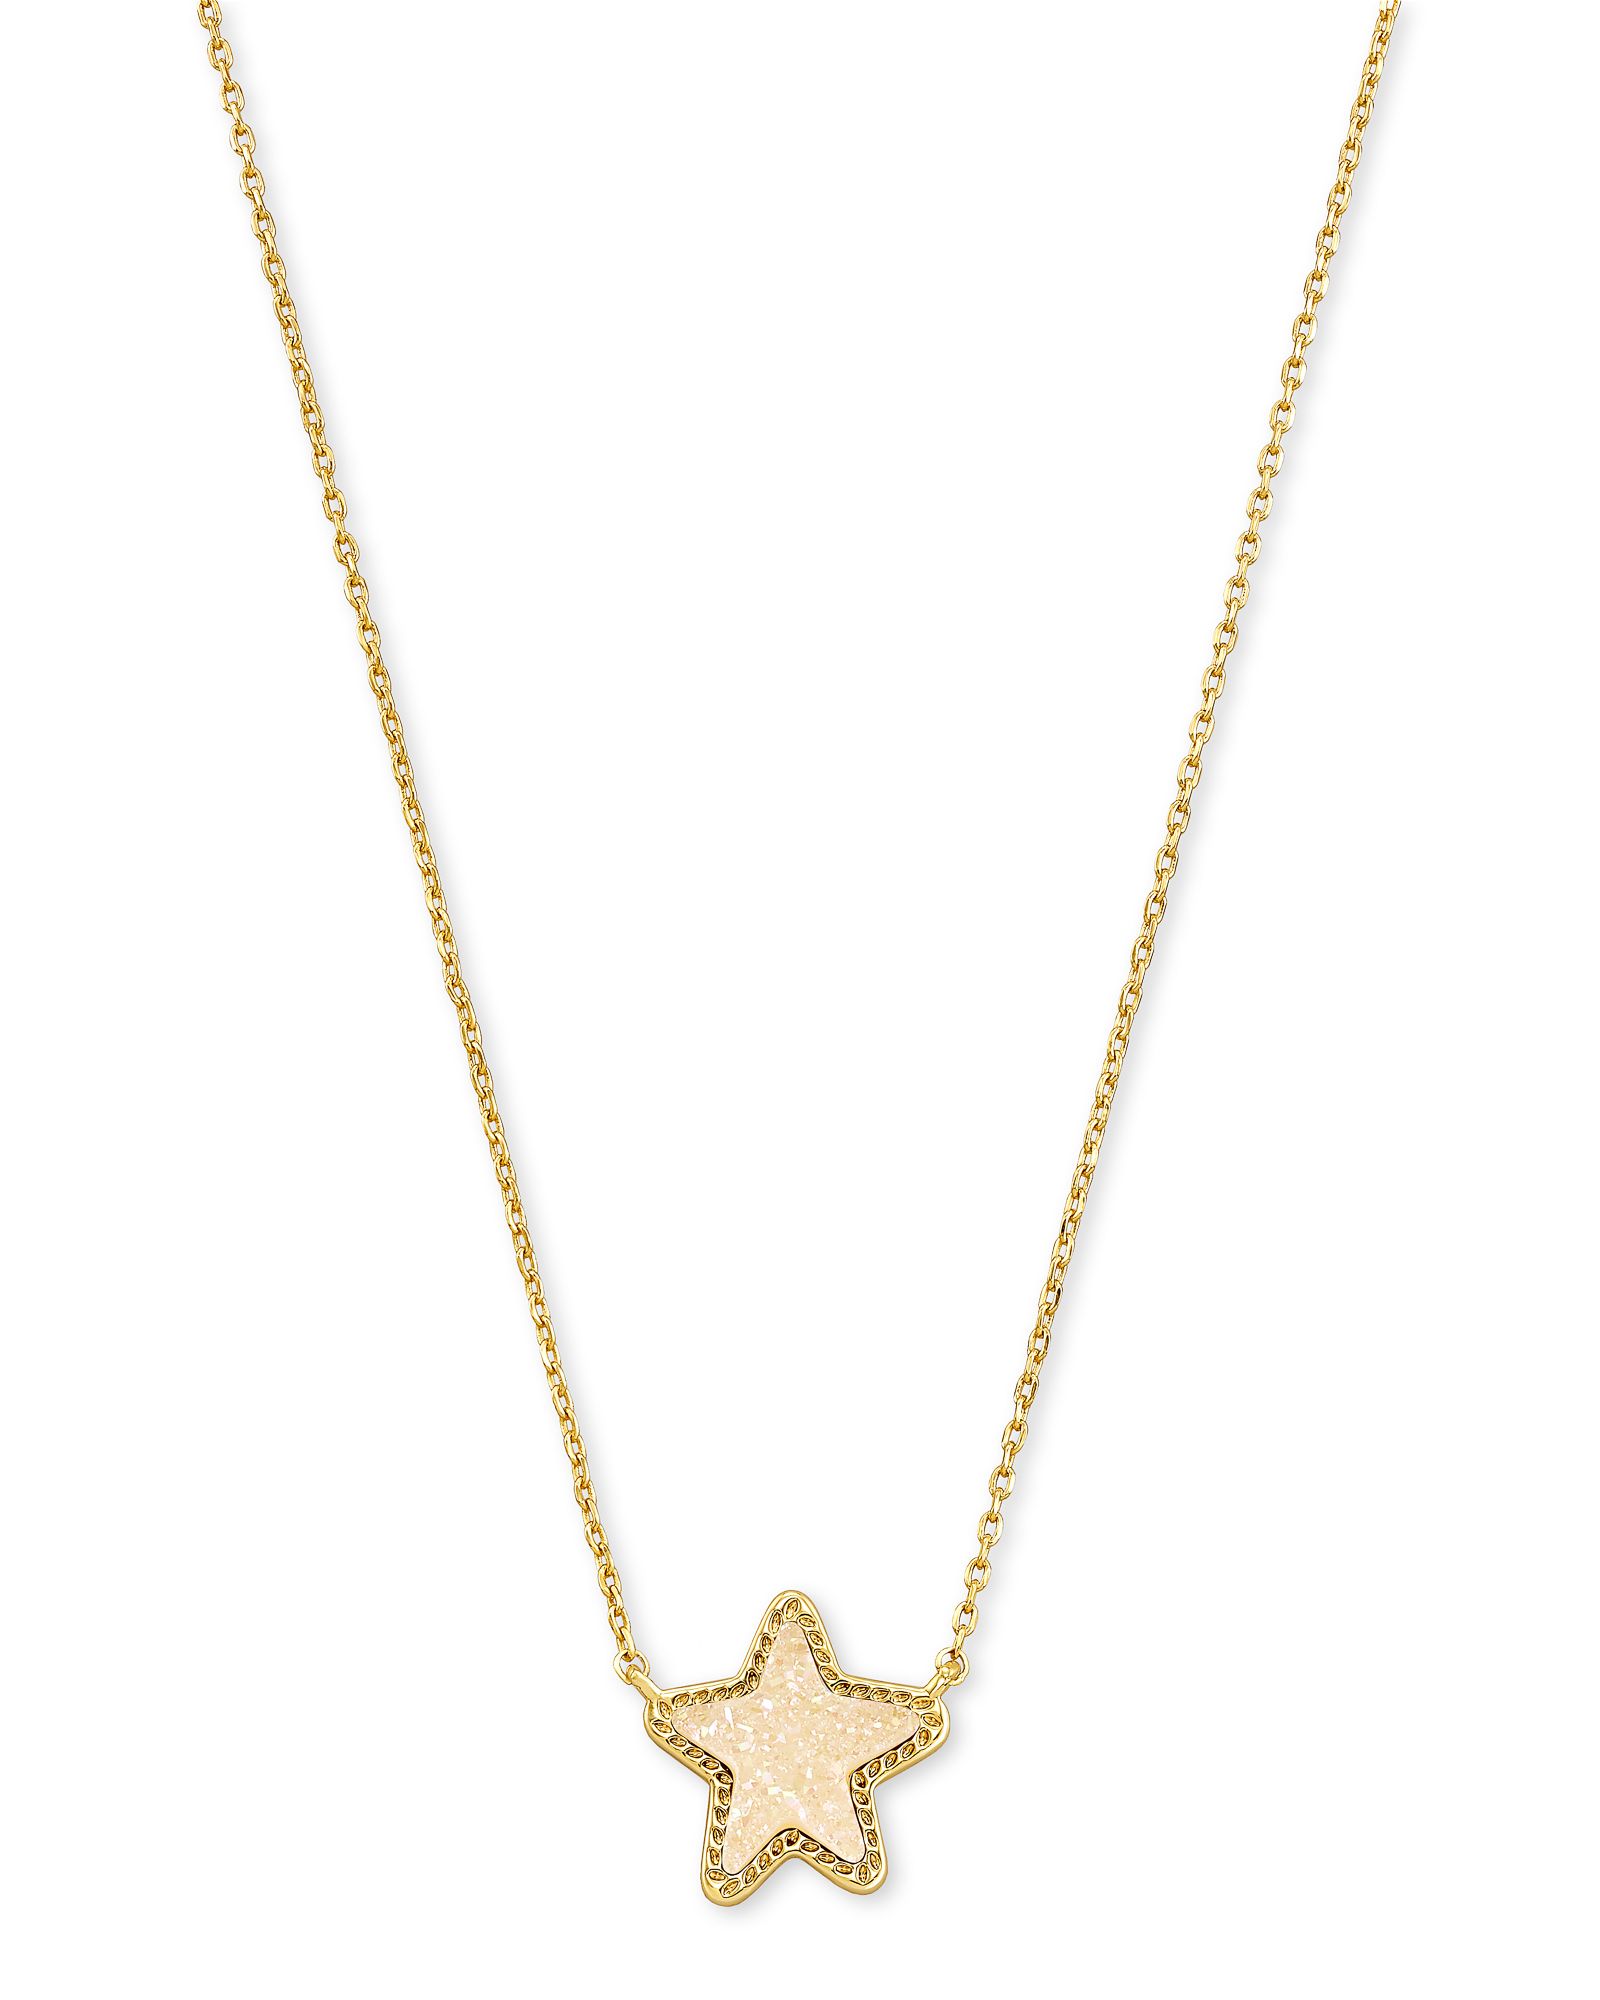 Jae Star Gold Pendant Necklace in Bright Red Drusy | Kendra Scott